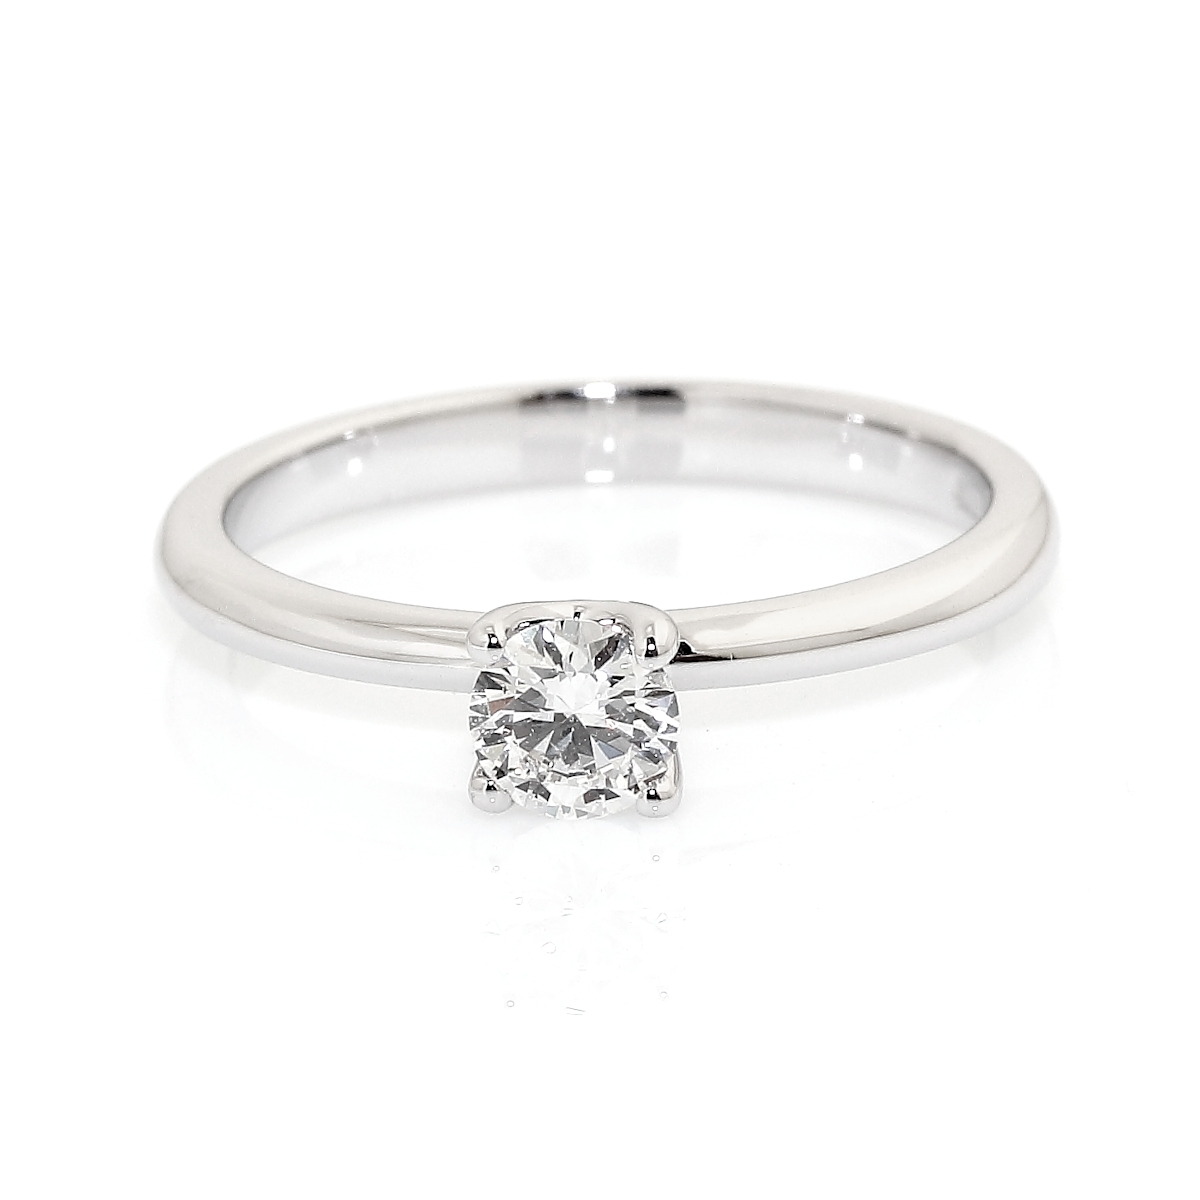 750 Mill. White Gold Ring with 0,31 Ct. F-Vs Diamond